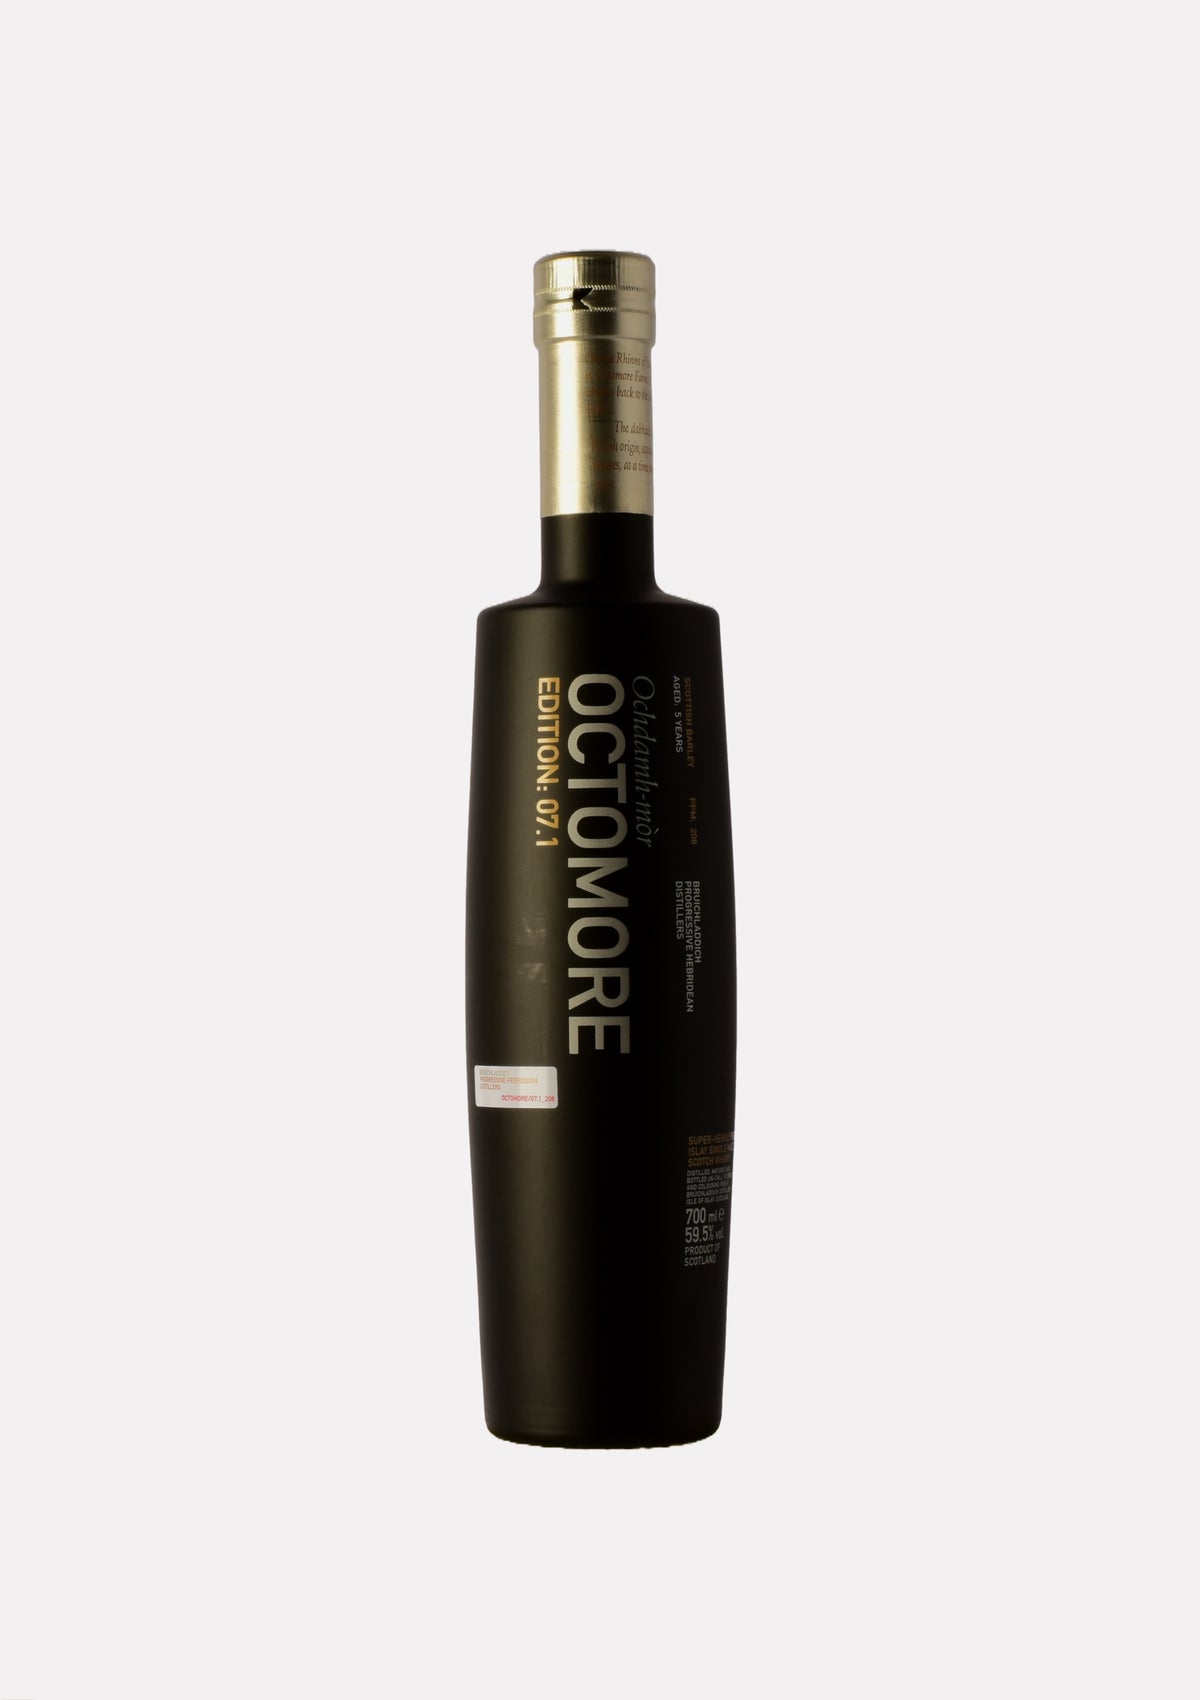 Octomore 07.1 208 ppm